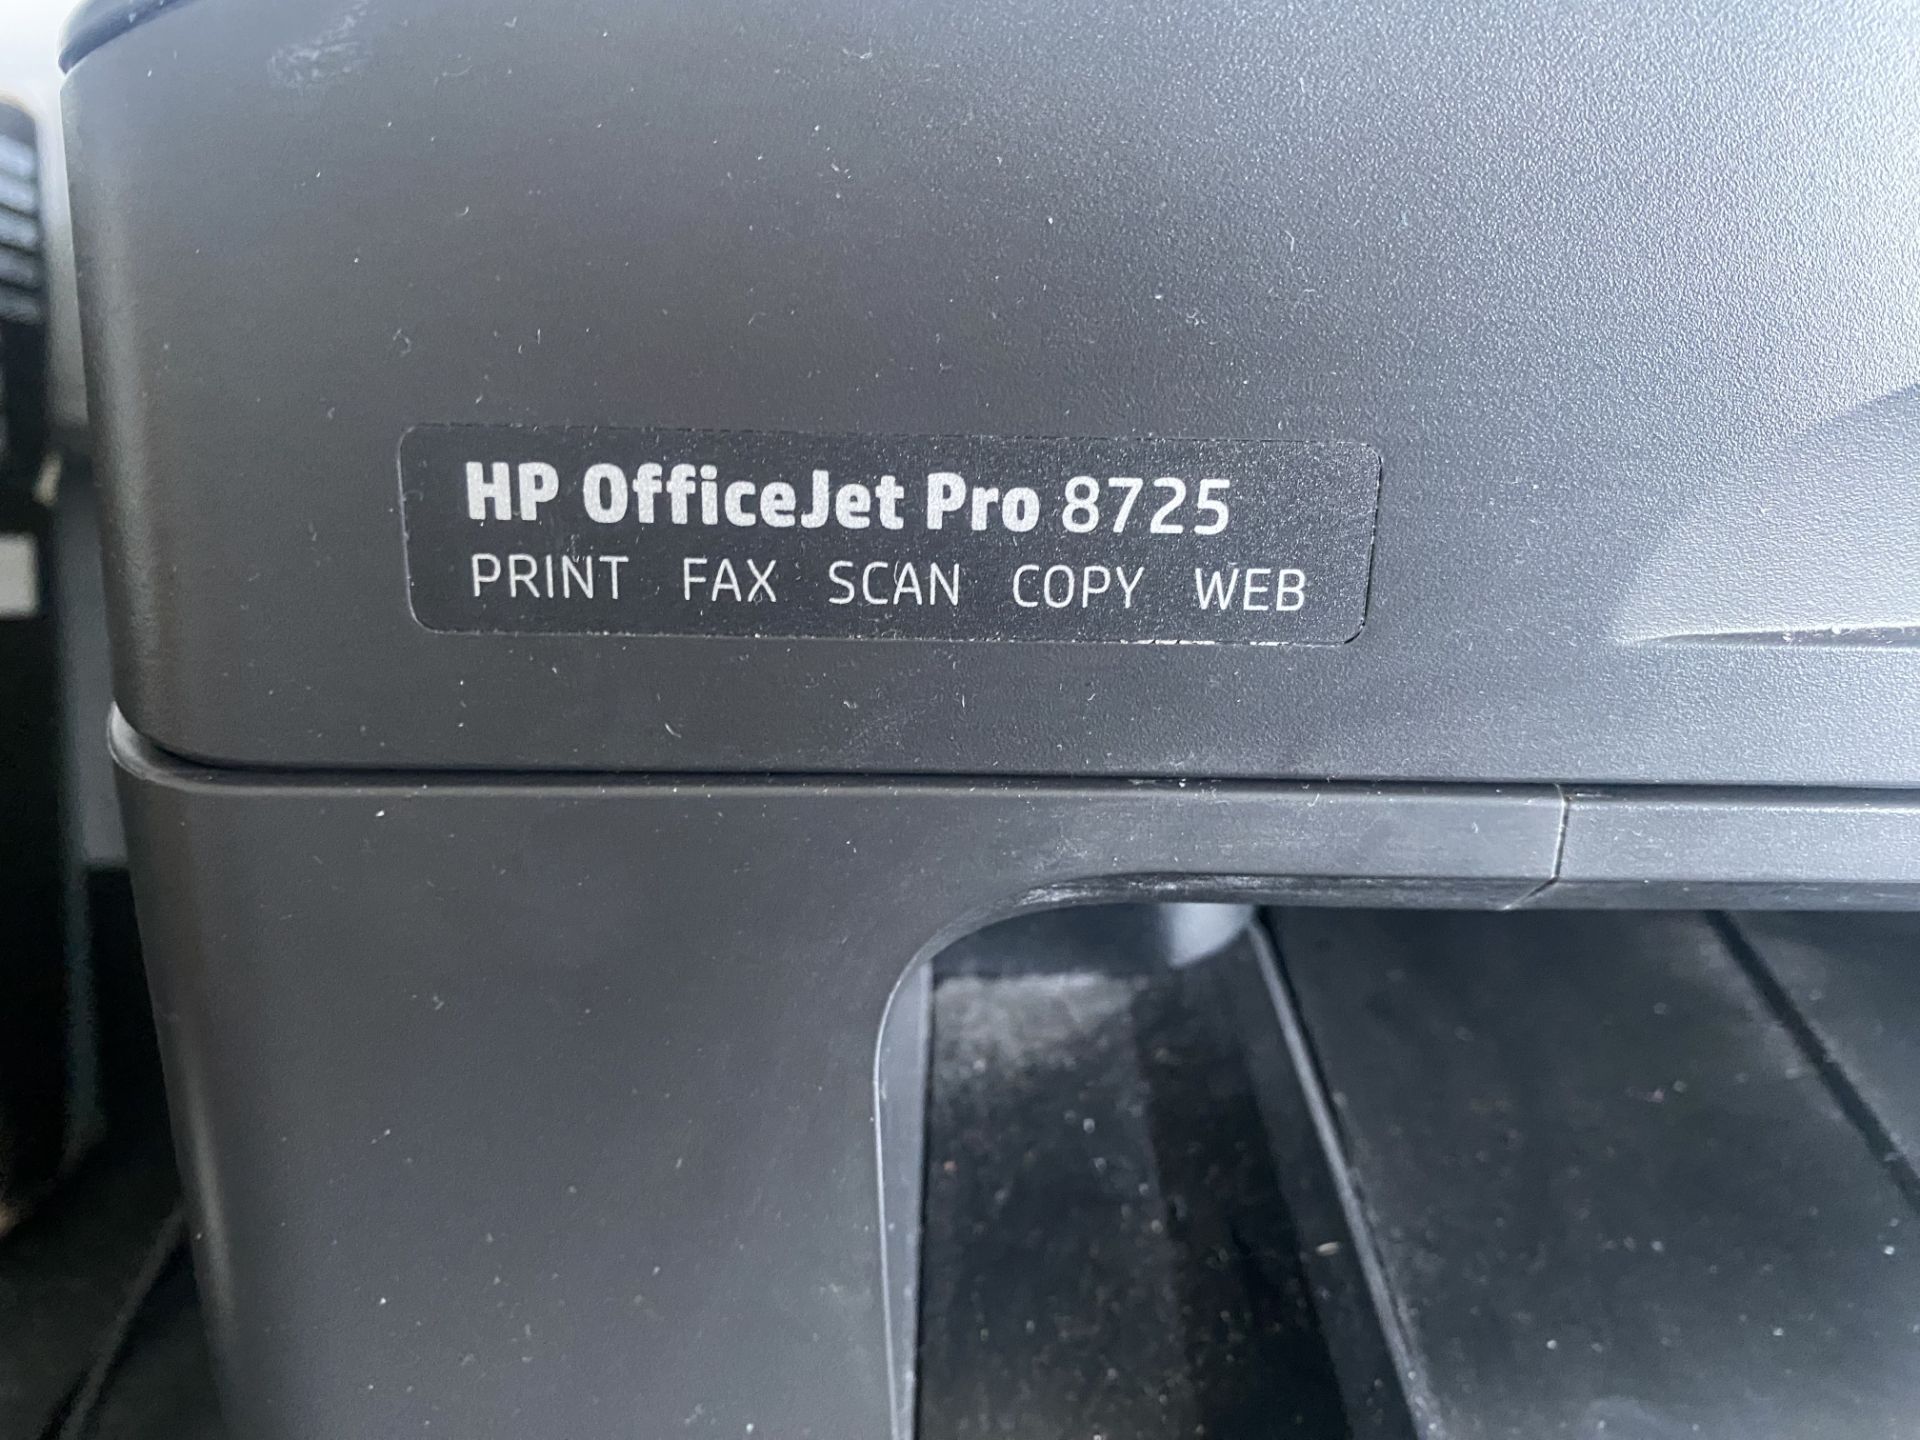 HP OfficeJet Pro 8725 print/fax/scan/copy/web - Image 2 of 4